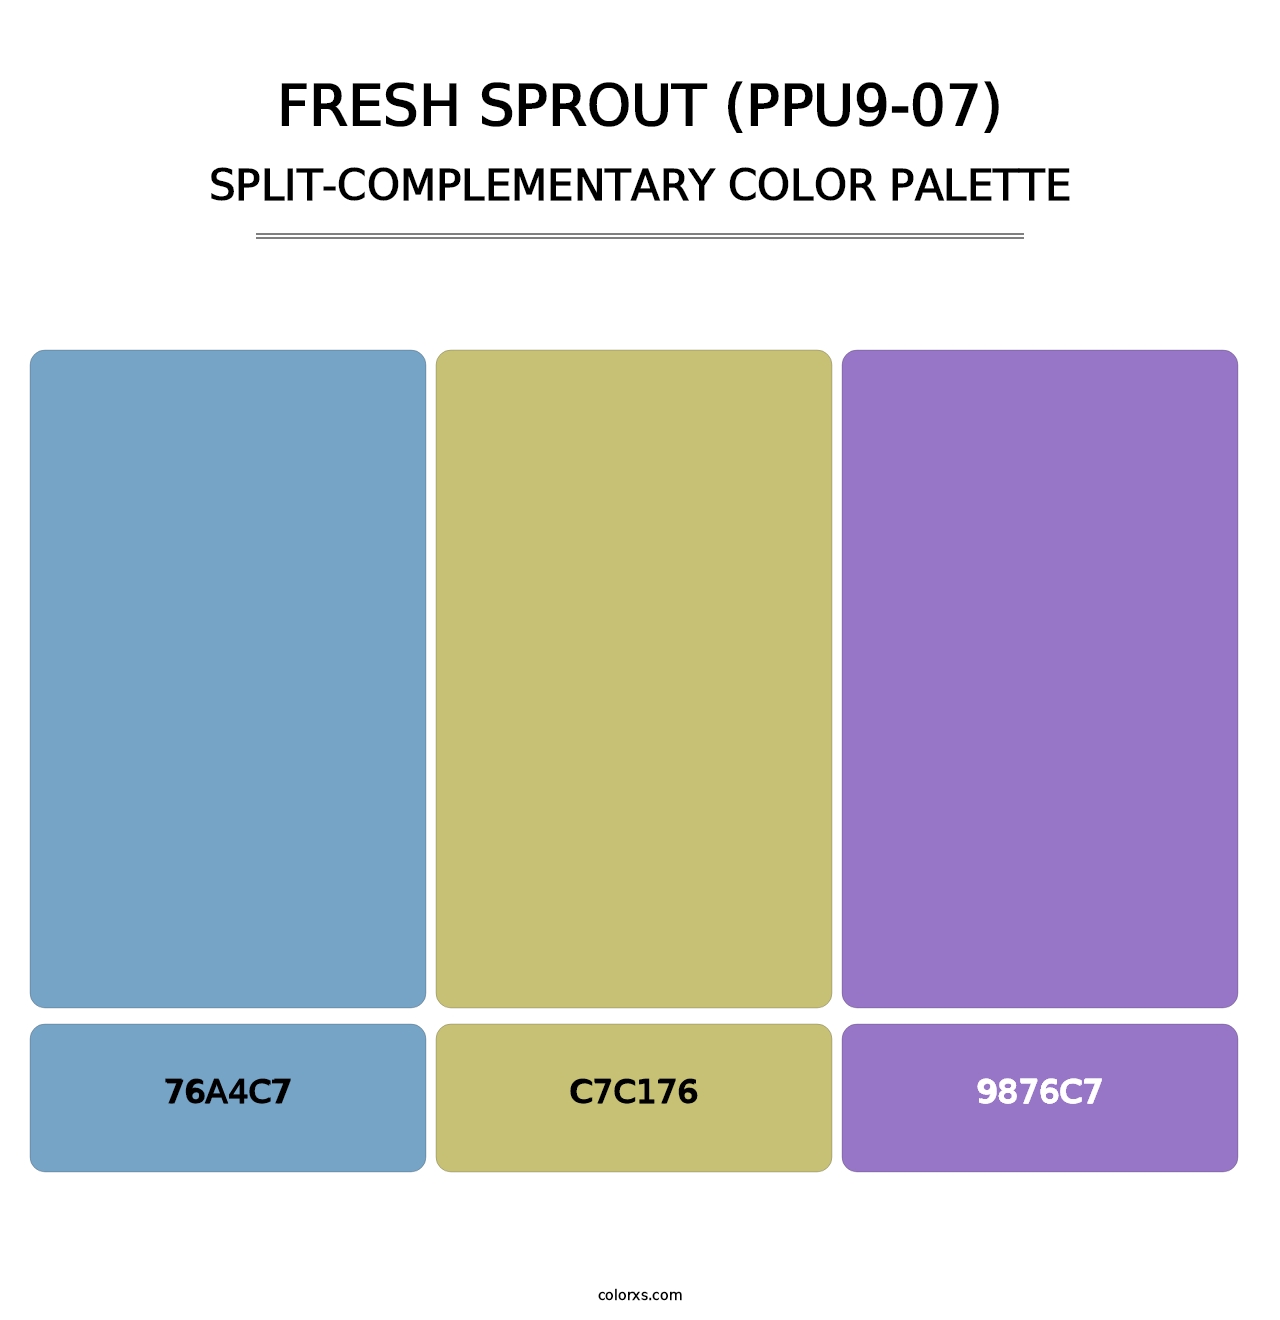 Fresh Sprout (PPU9-07) - Split-Complementary Color Palette